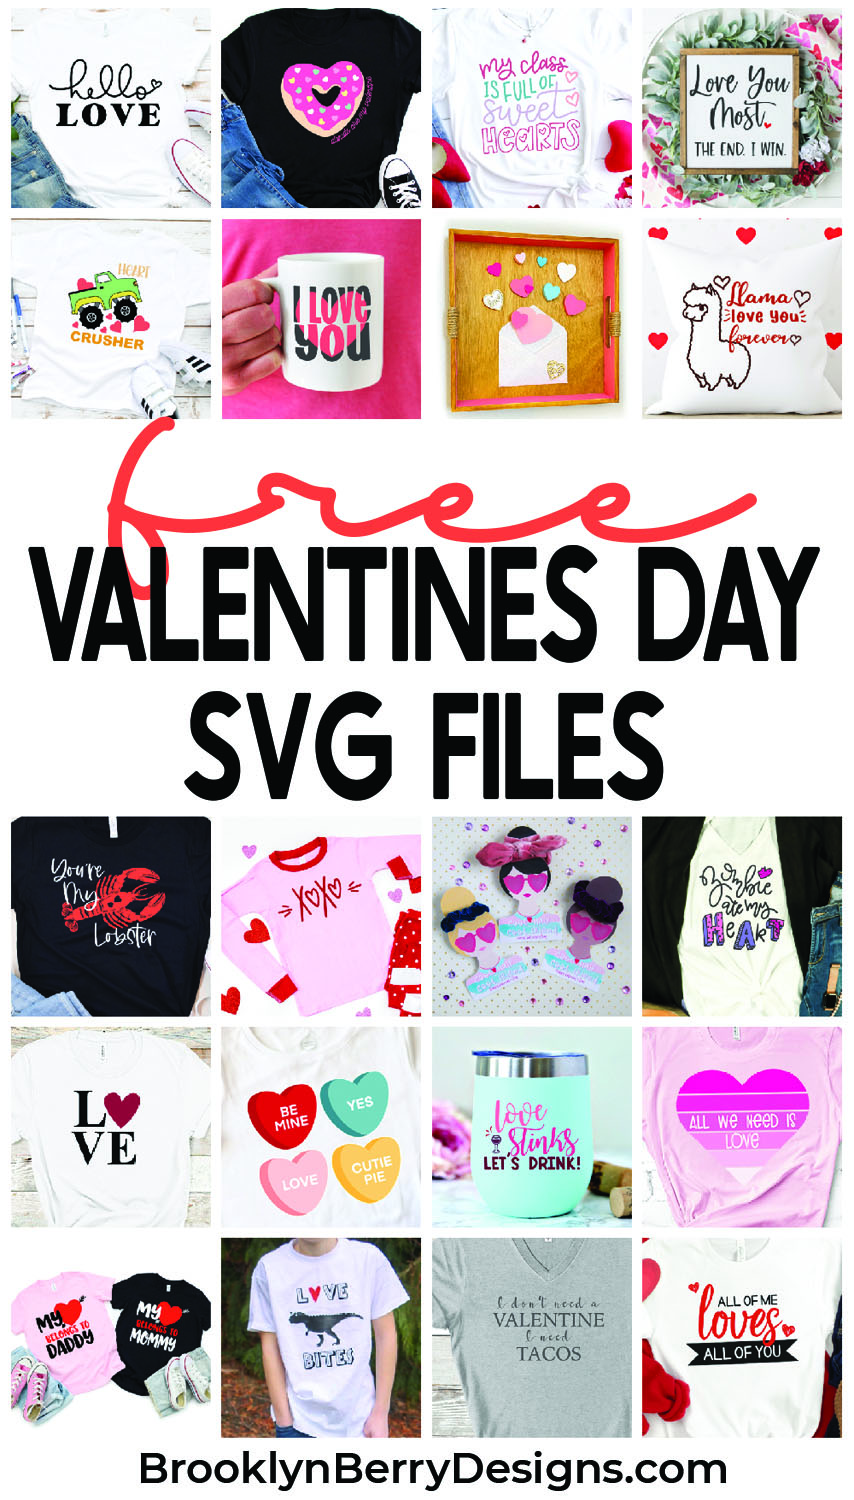 Collage image of various valentines themed svg files to use with a cricut, silhouette, or other craft machines.